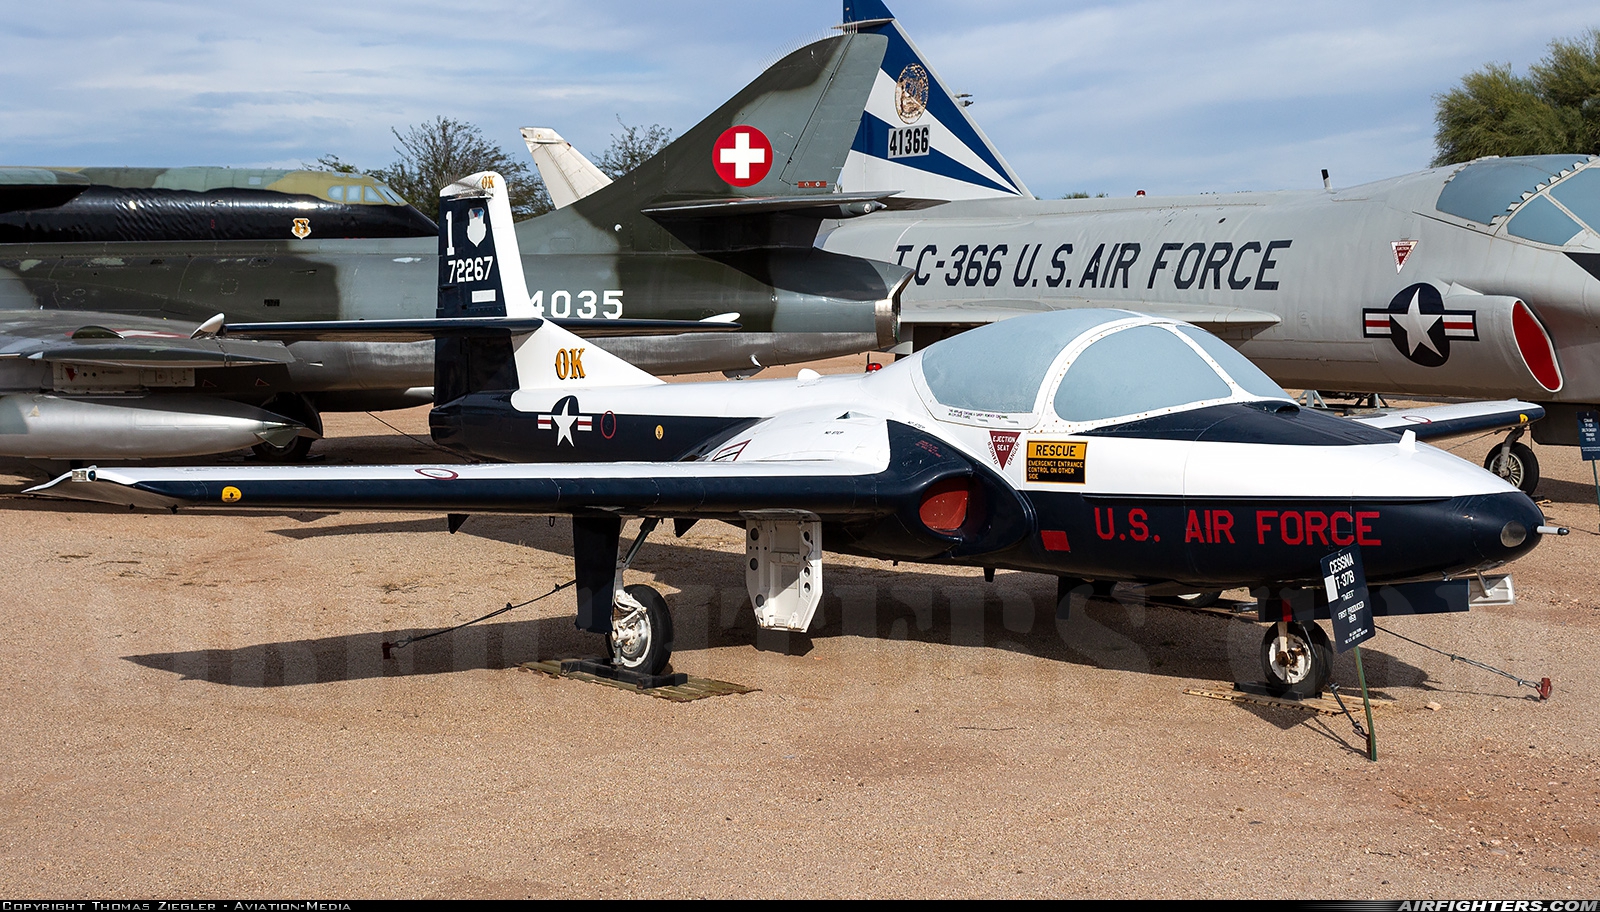 USA - Air Force Cessna T-37B Tweety Bird (318B) 57-2267 at Tucson - Pima Air and Space Museum, USA